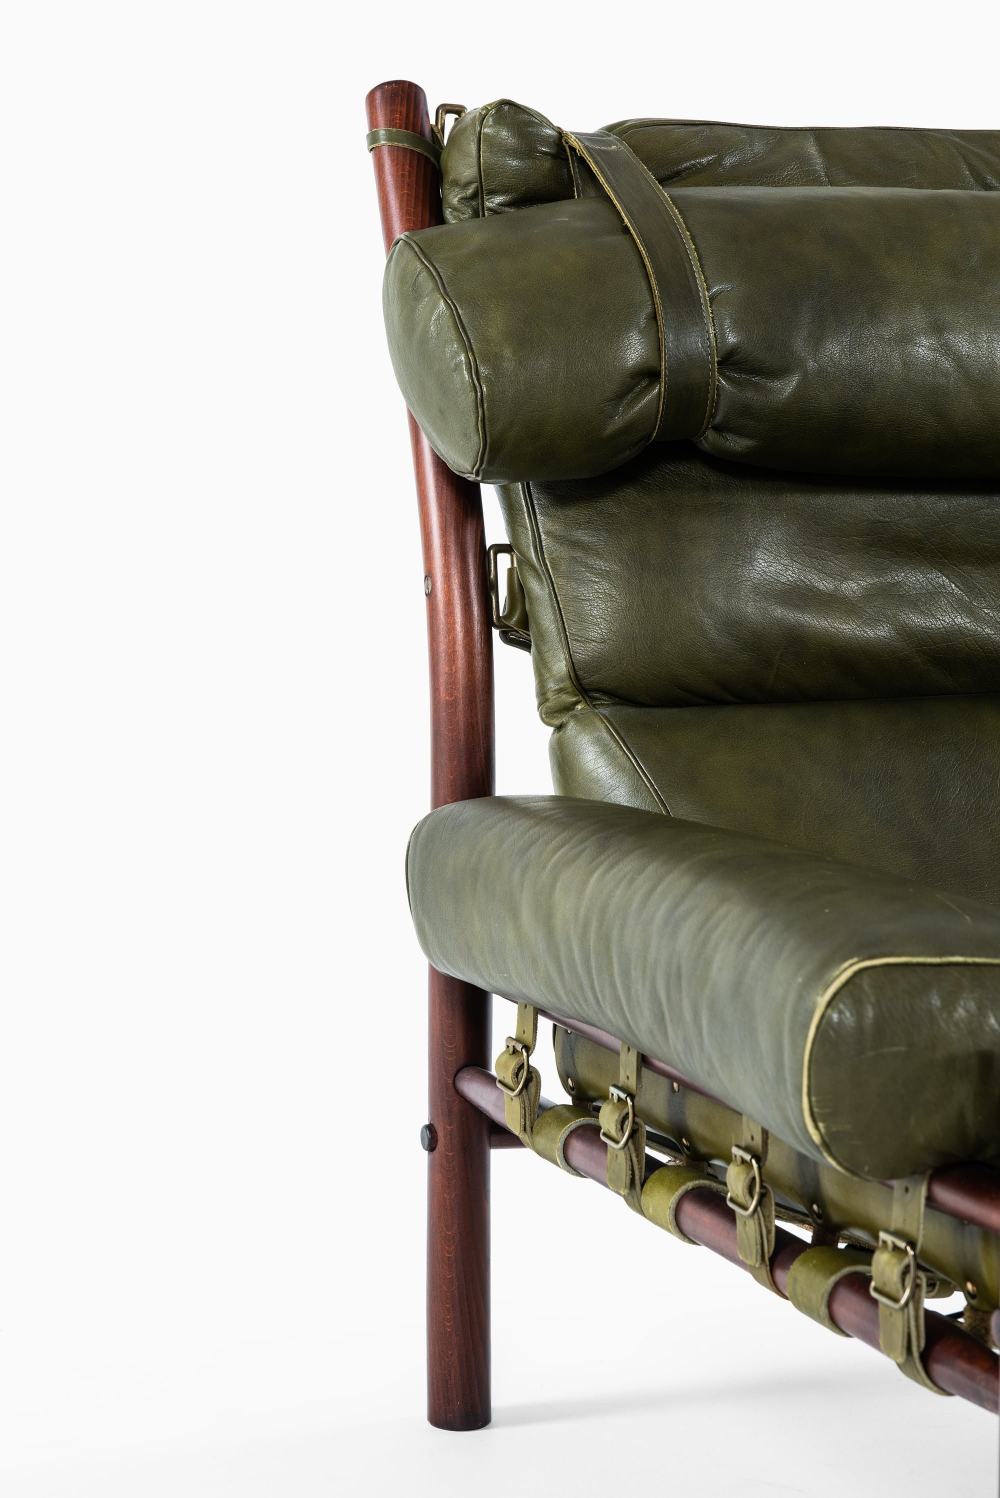 Luxurious Leather Chairs for Comfort and Style